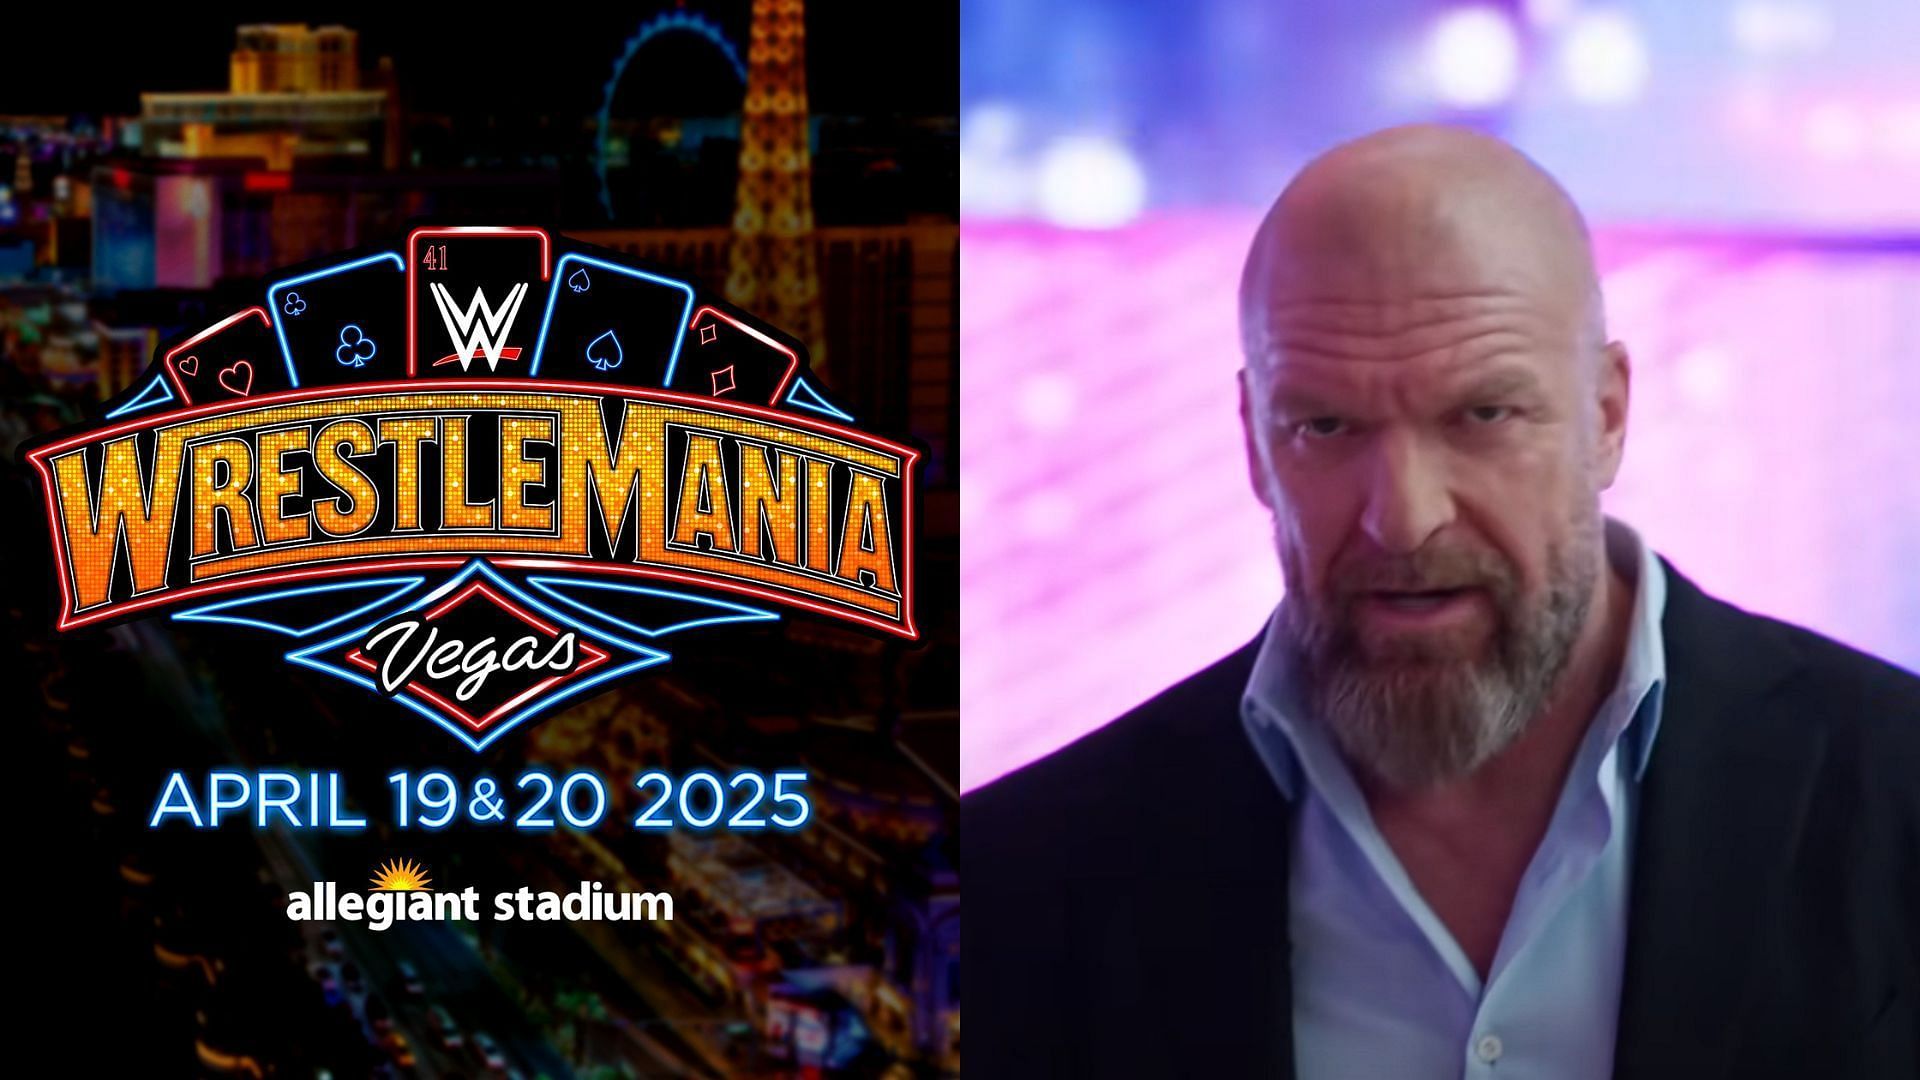 Triple H revealed that WrestleMania 41 will be in Las Vegas [Photos courtesy of WWE